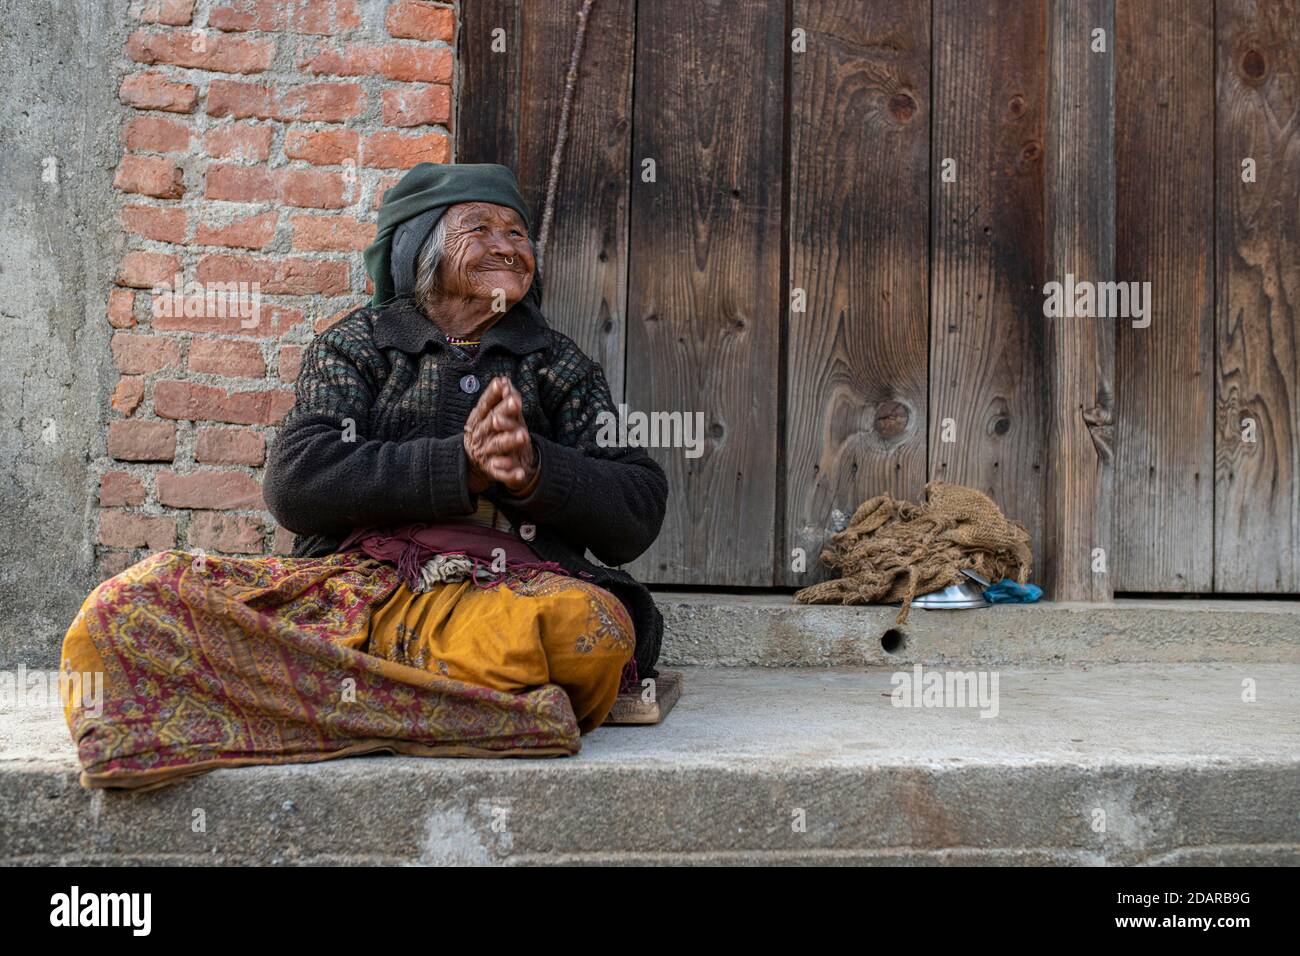 Friendly smiling elderly woman with headscarf and nose ring sitting in front of a wooden door, Himalaya, Jiri, Khumbu region, Nepal Stock Photo